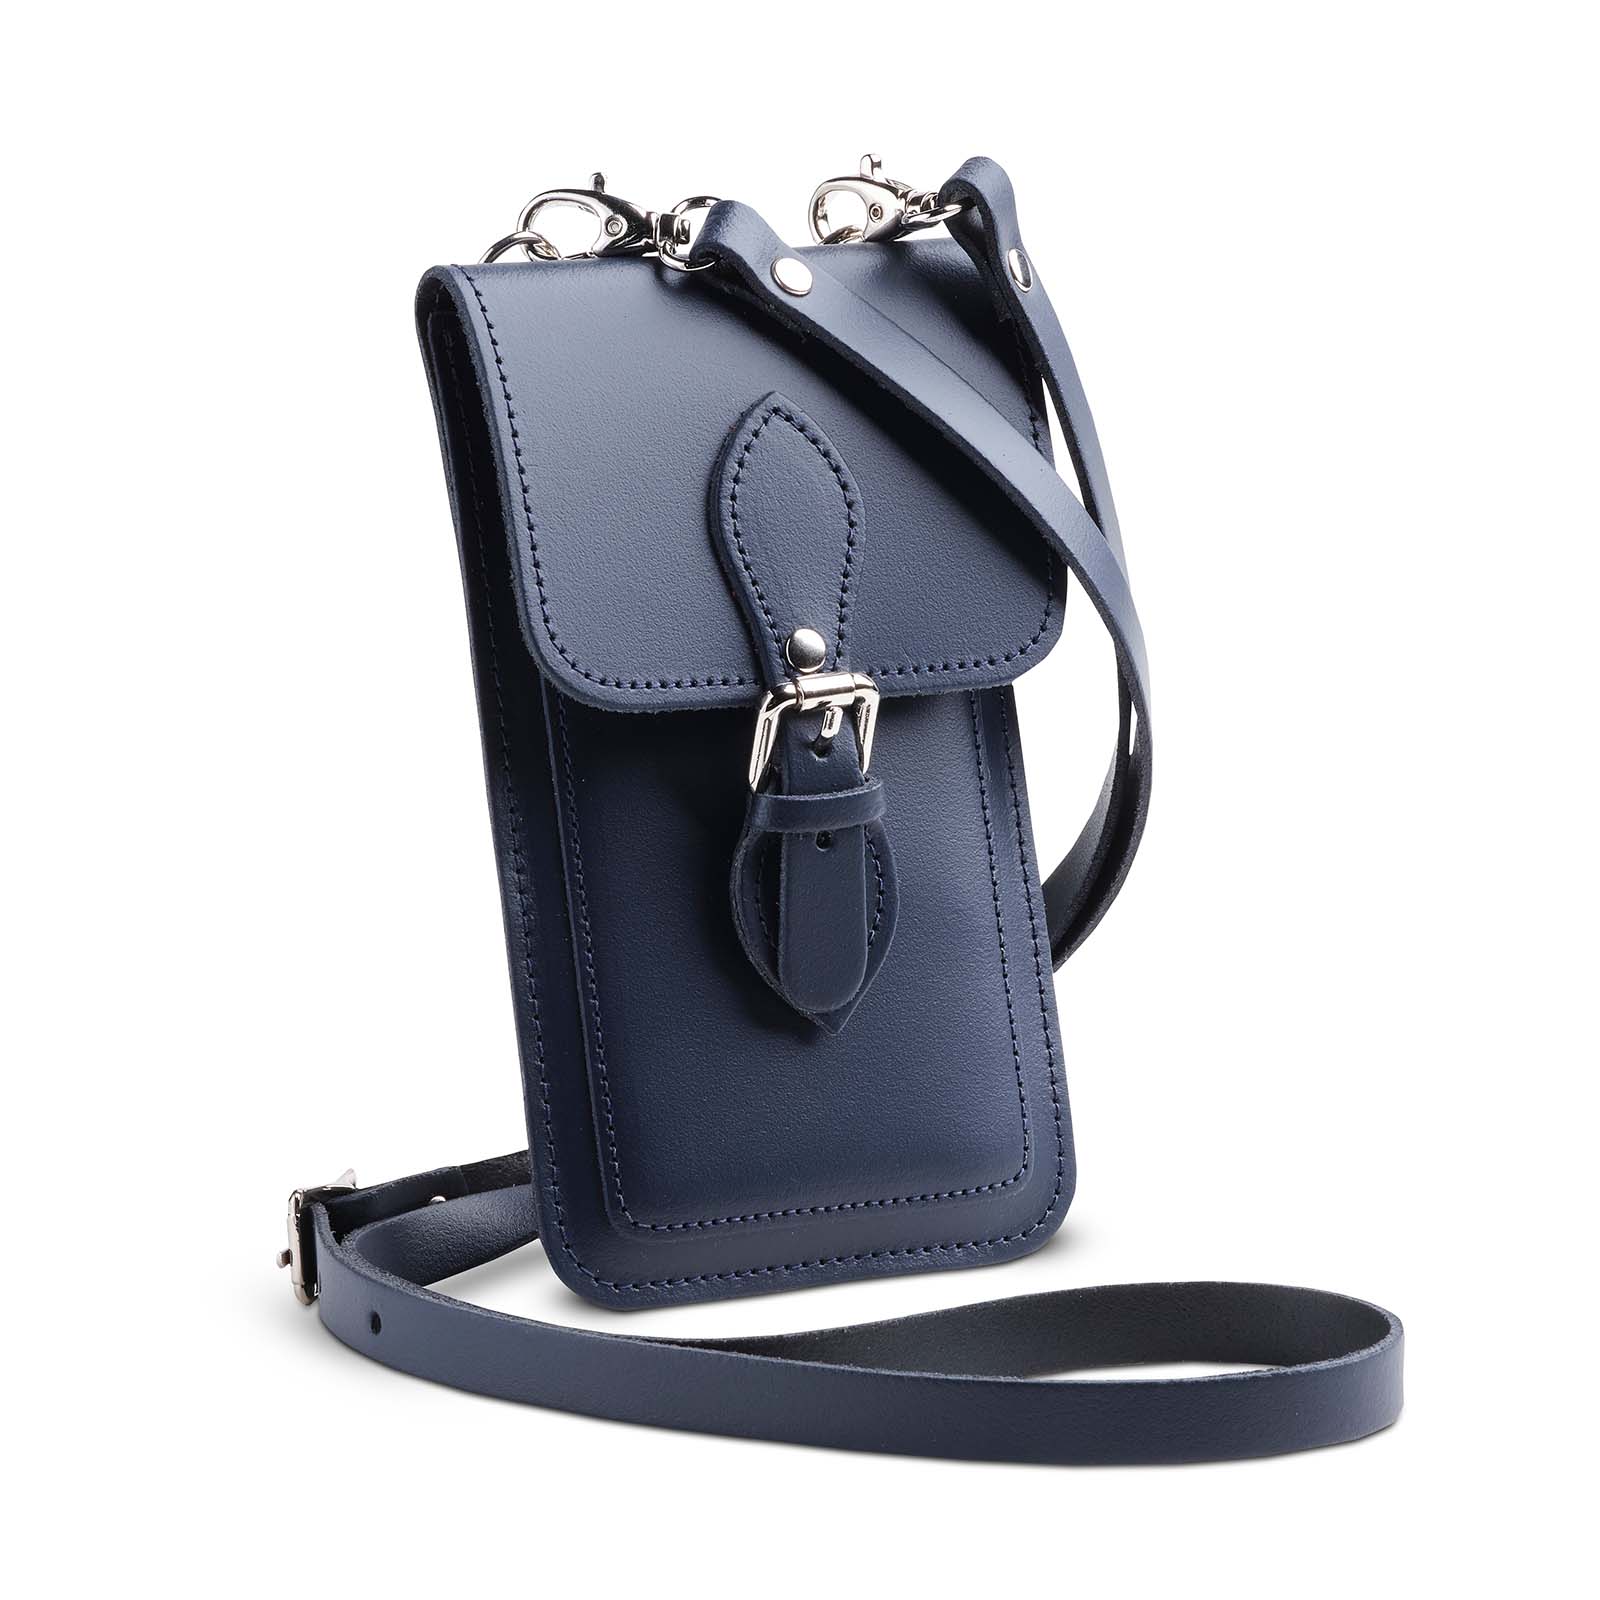 Handmade Leather Mobile Phone Pouch Plus - Navy Blue - Plus